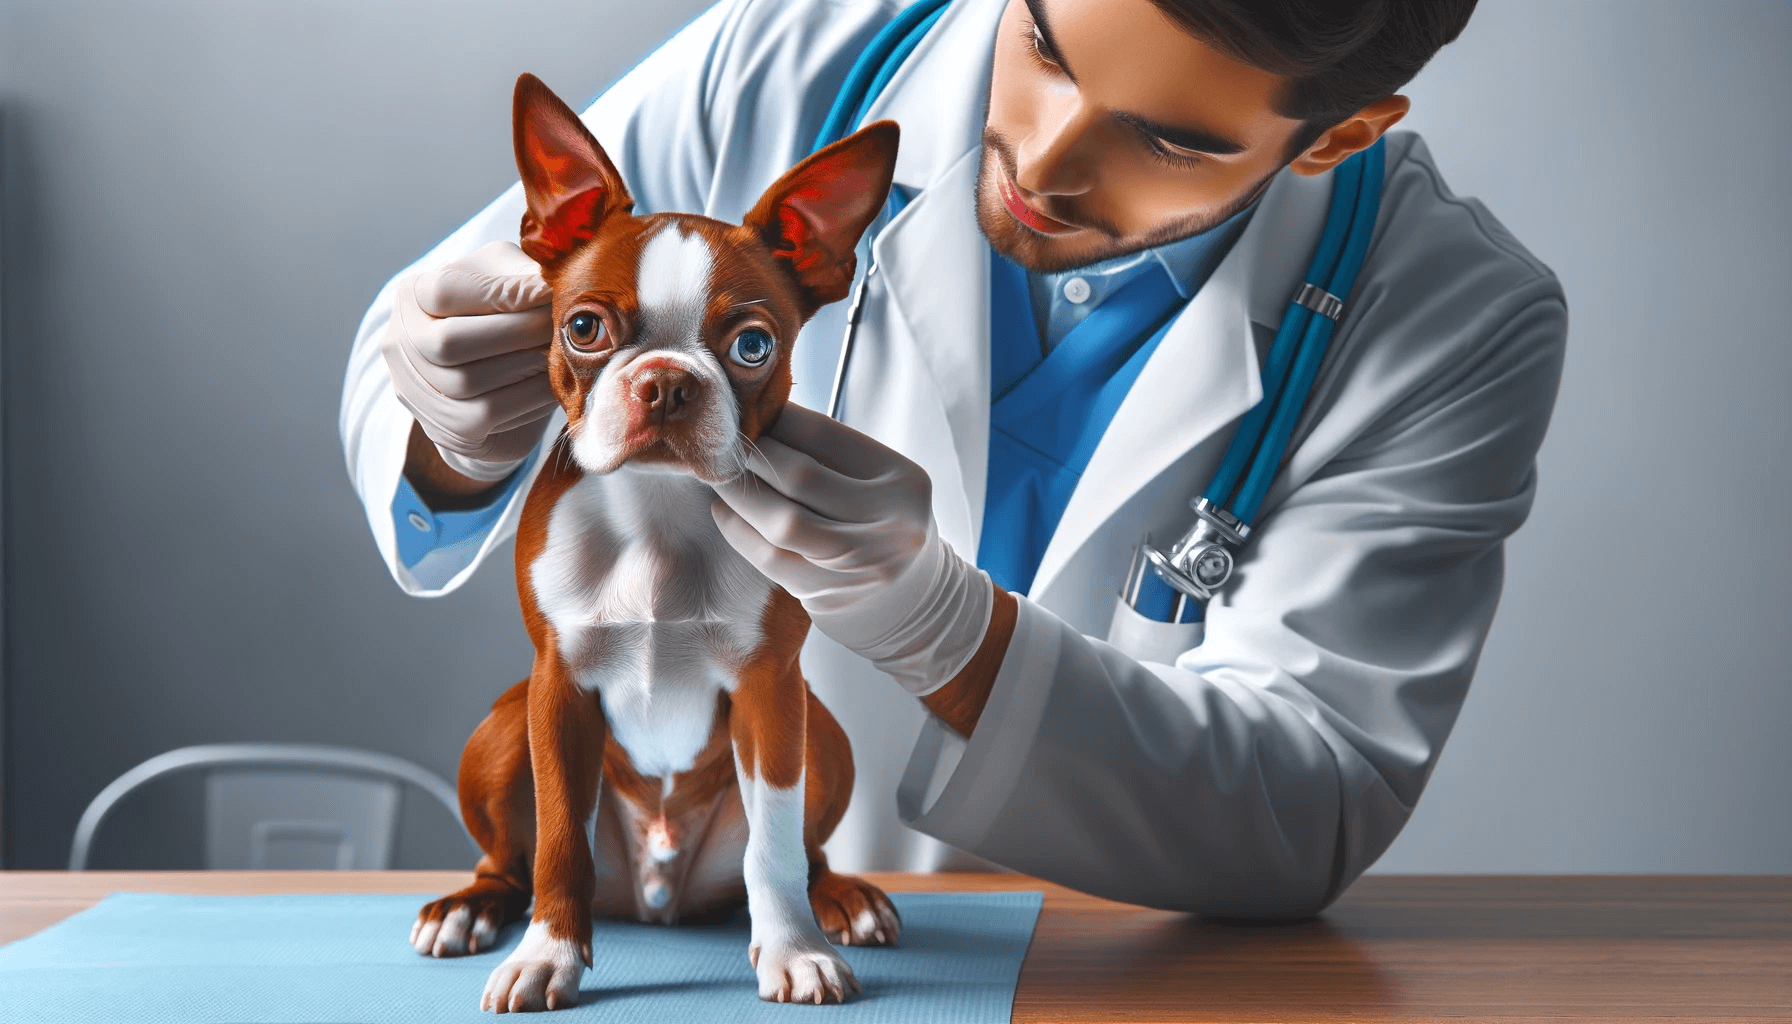 Red Boston Terrier Receiving a Health Check from a Veterinarian